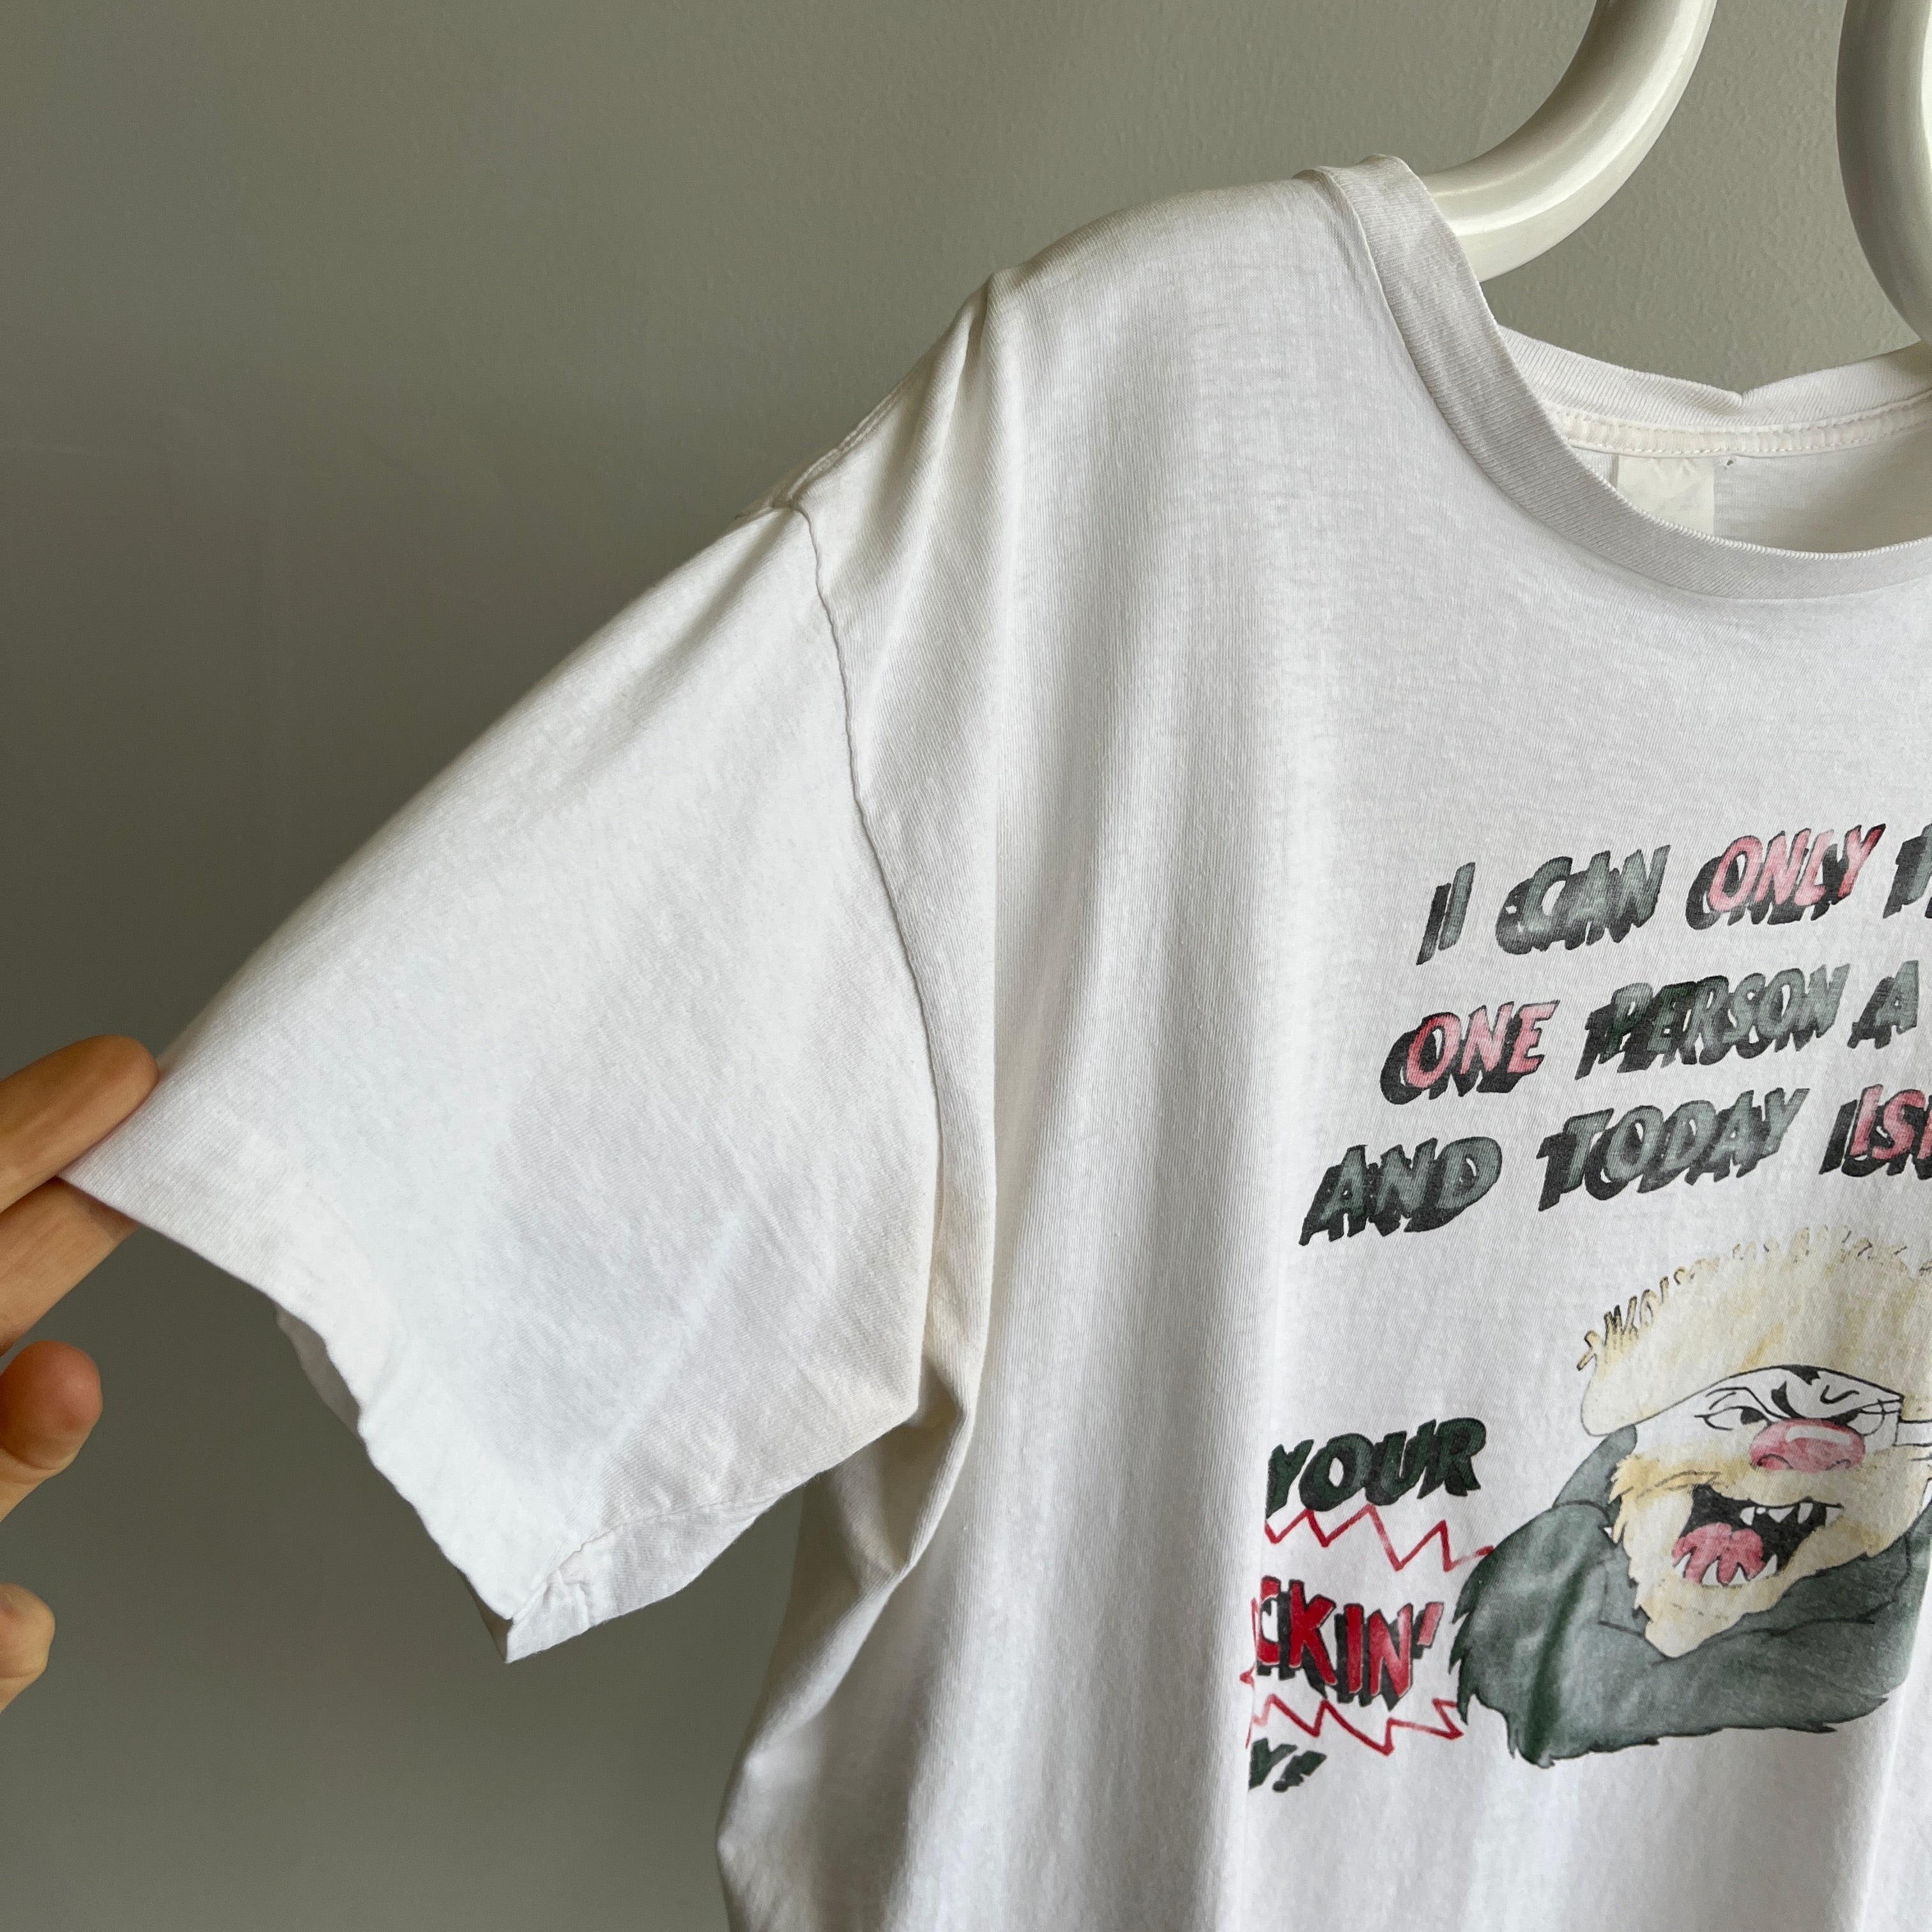 1980s Inappropriate and Rude T-Shirt